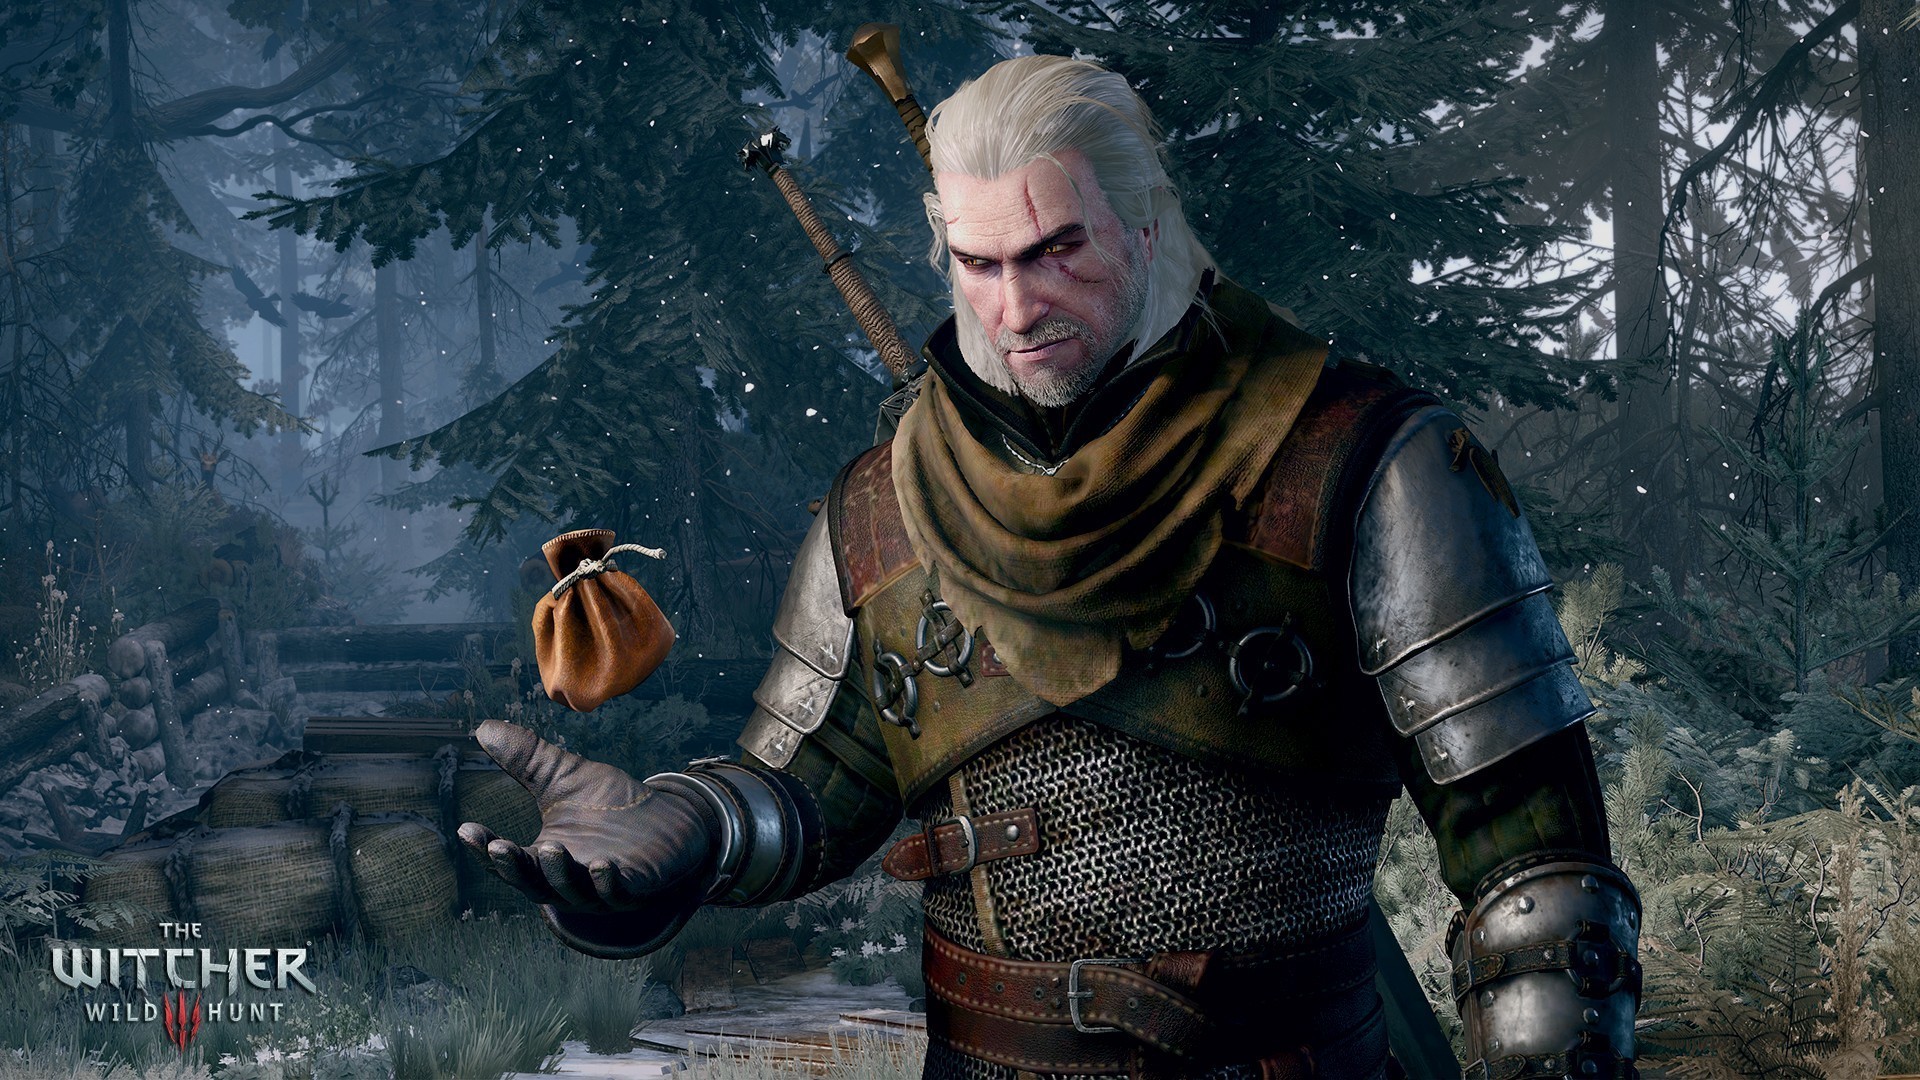 Dragon Age Inquisition Has Too Many Fetch Quests The Witcher 3 Designer Says